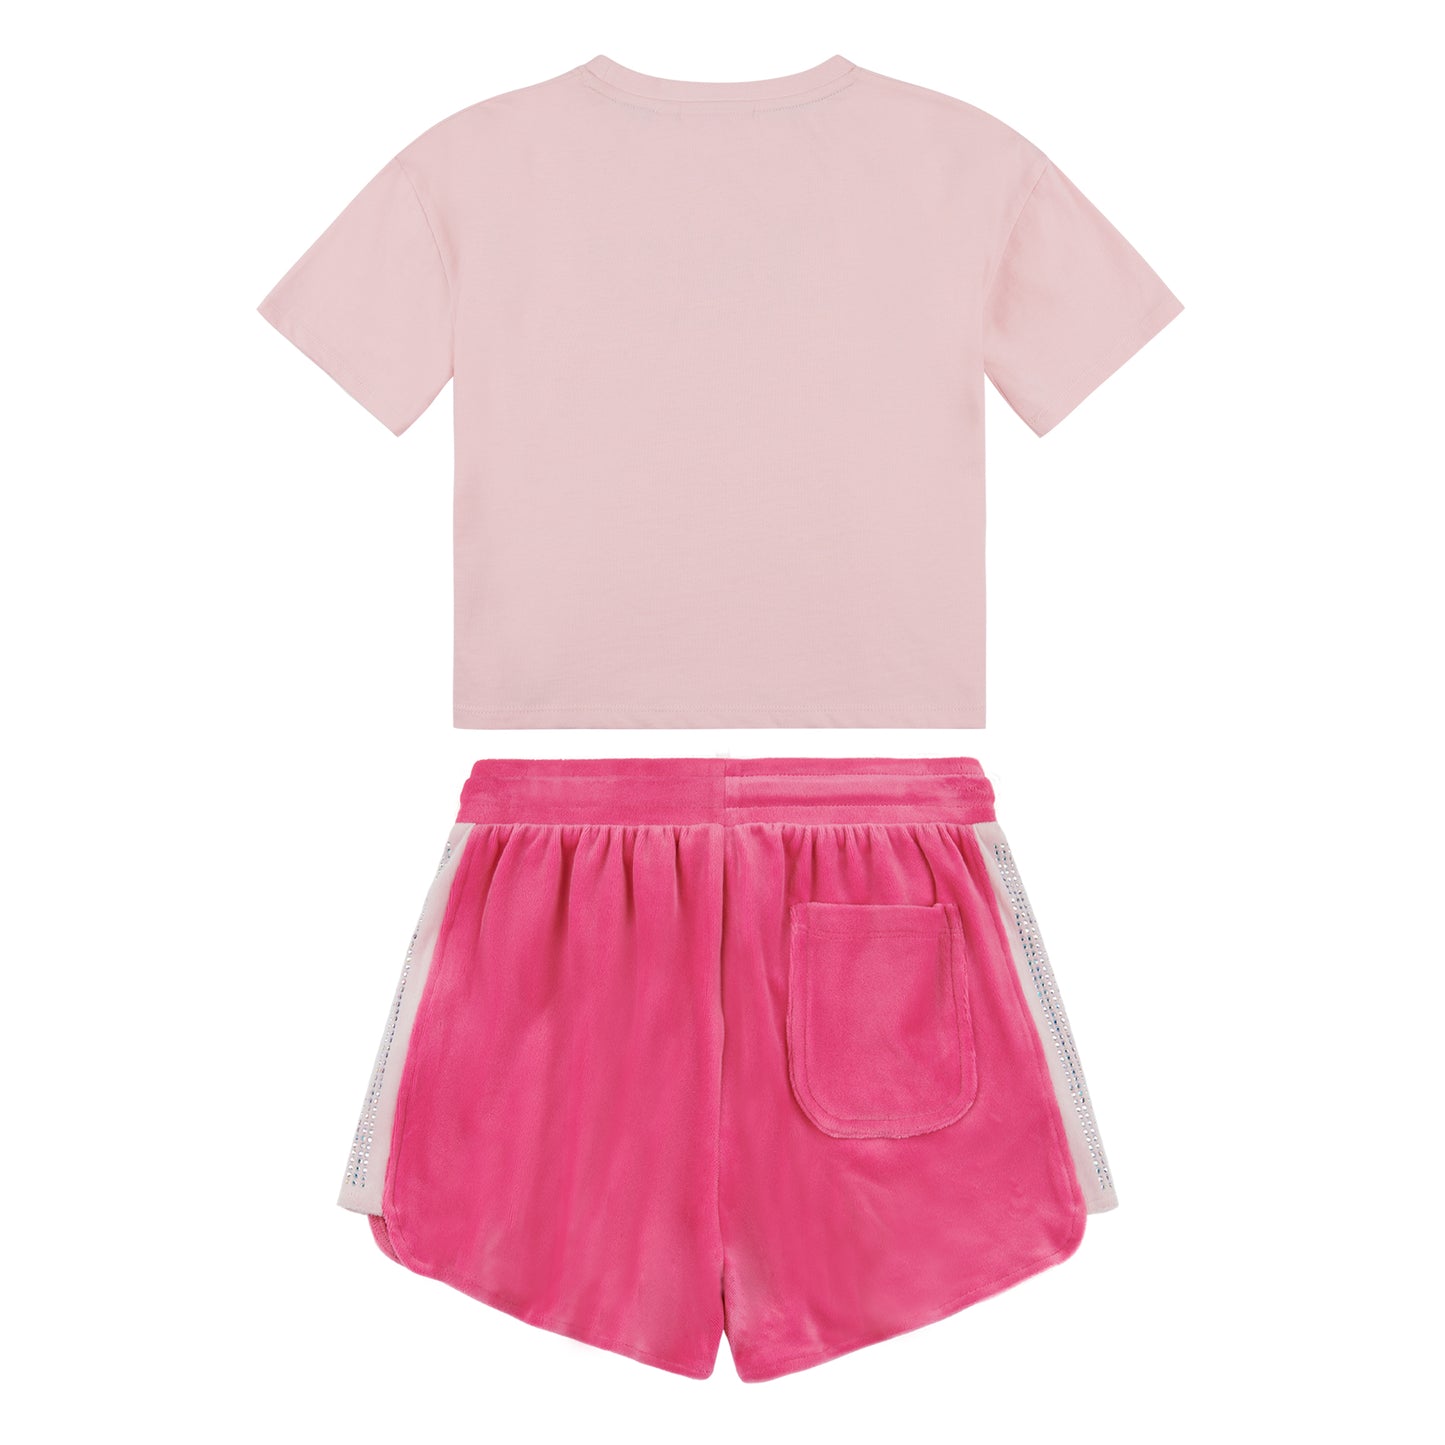 Juicy Couture Girls Blossom Overside T shirt and Runner Shorts Set